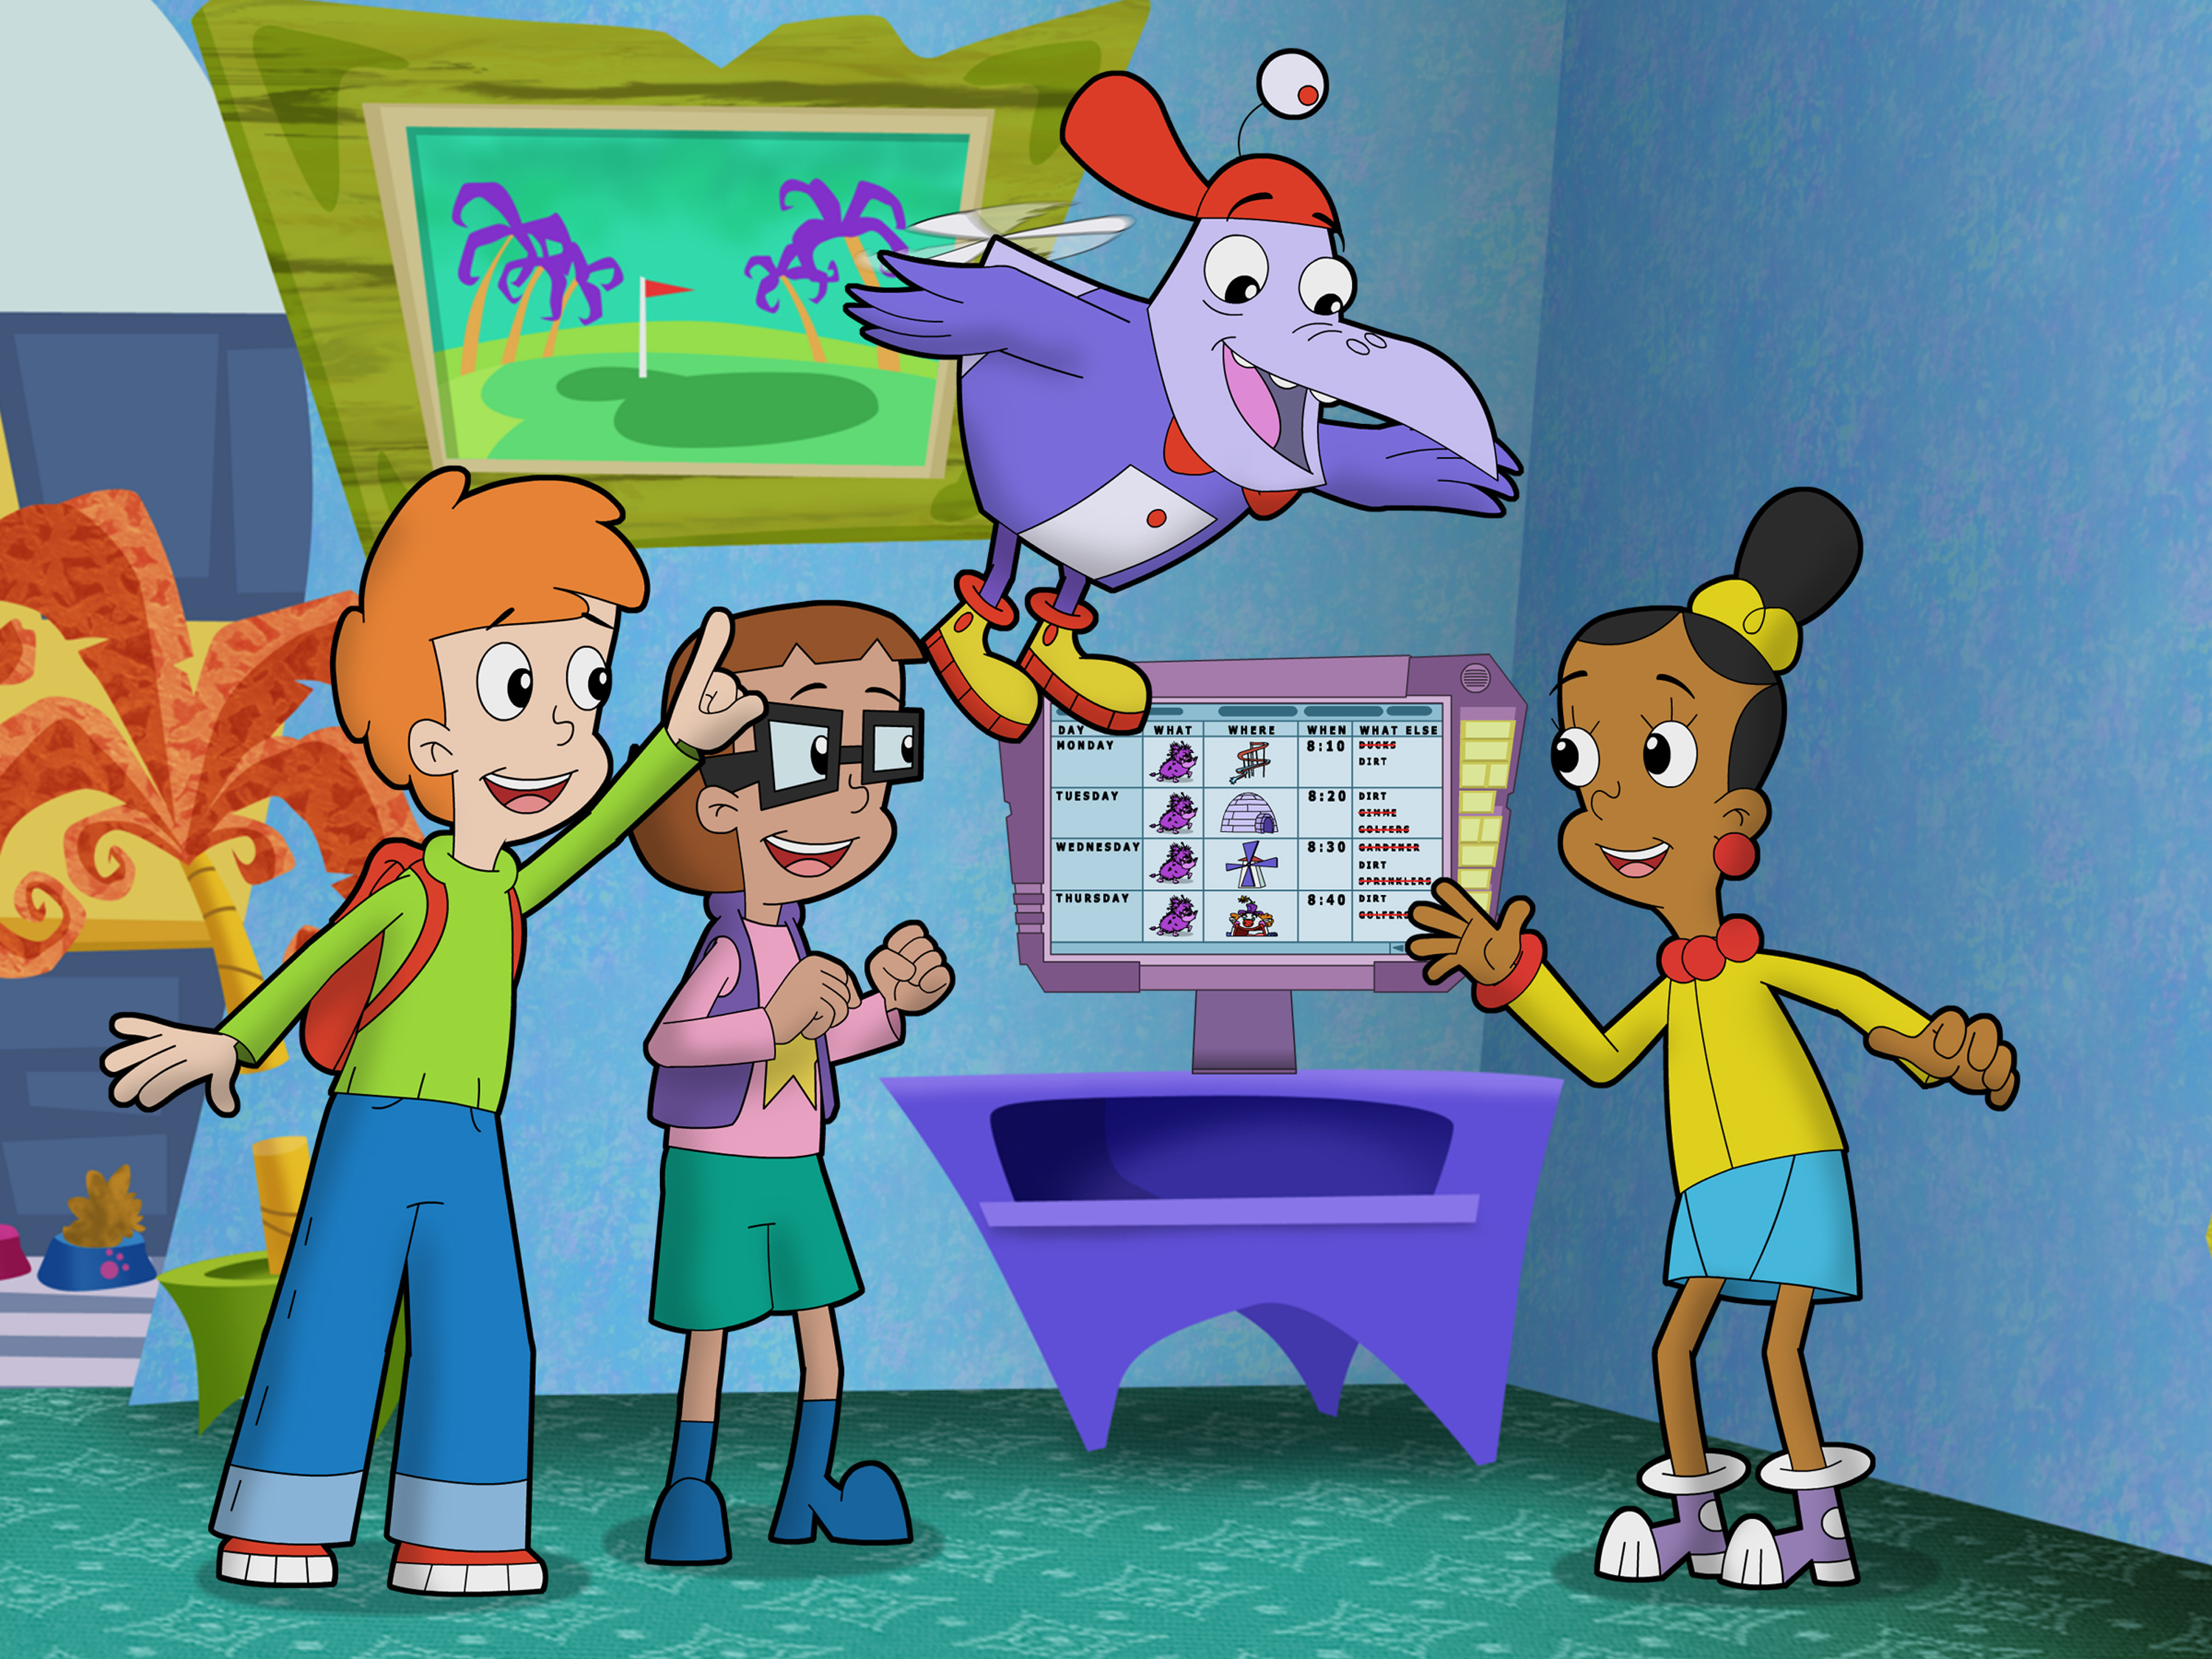 Tune into new episodes of Cyberchase this December!